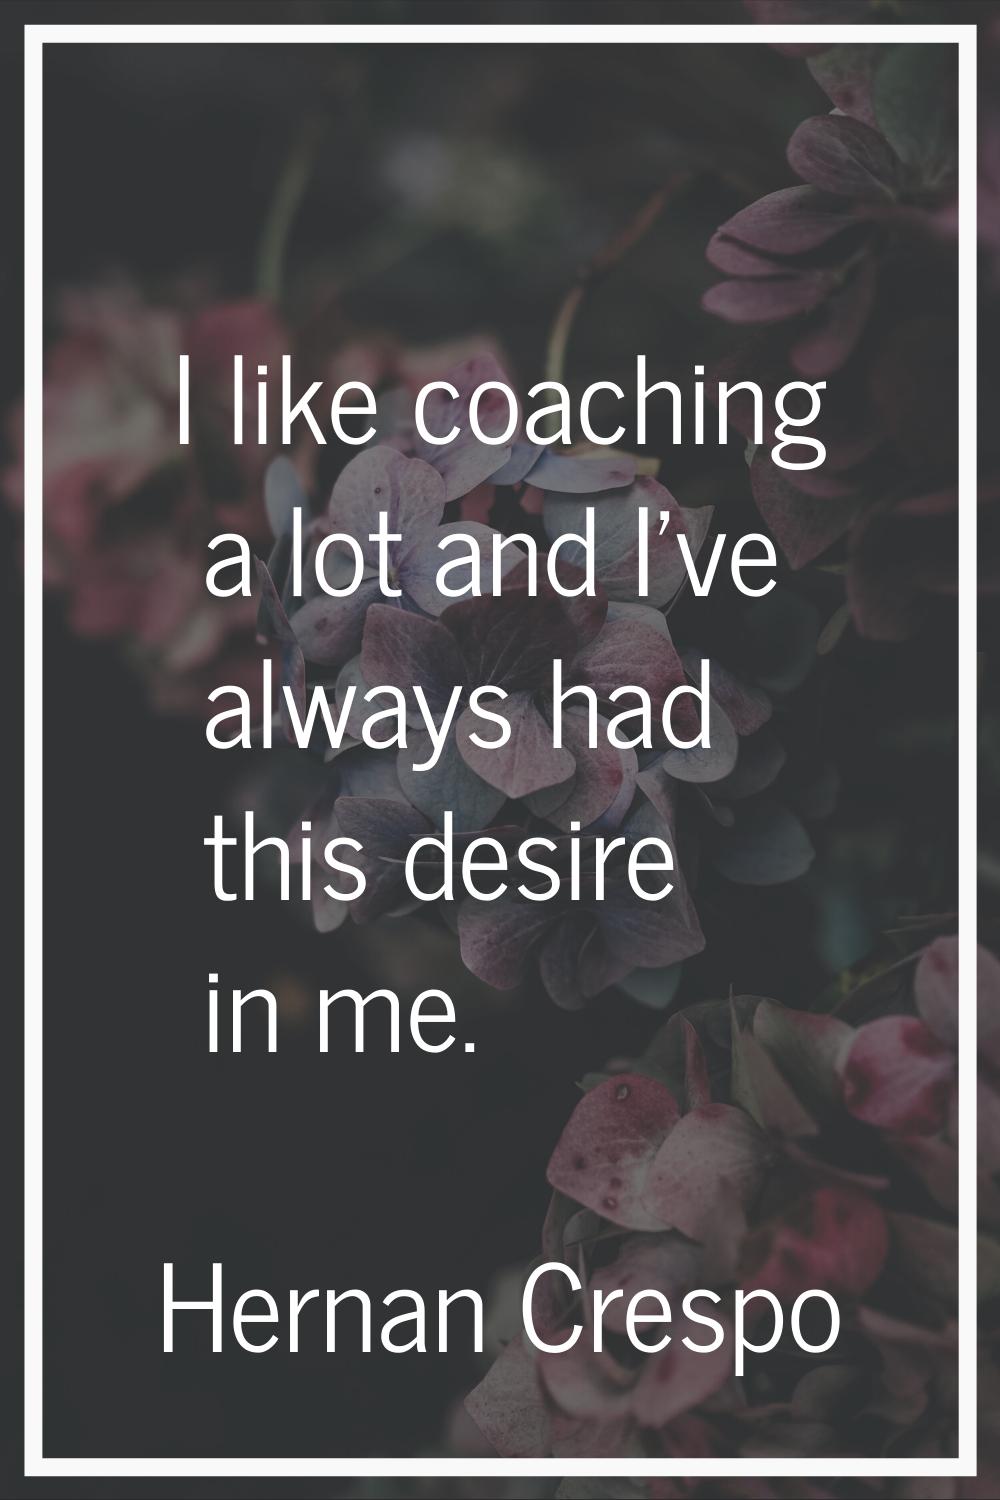 I like coaching a lot and I've always had this desire in me.